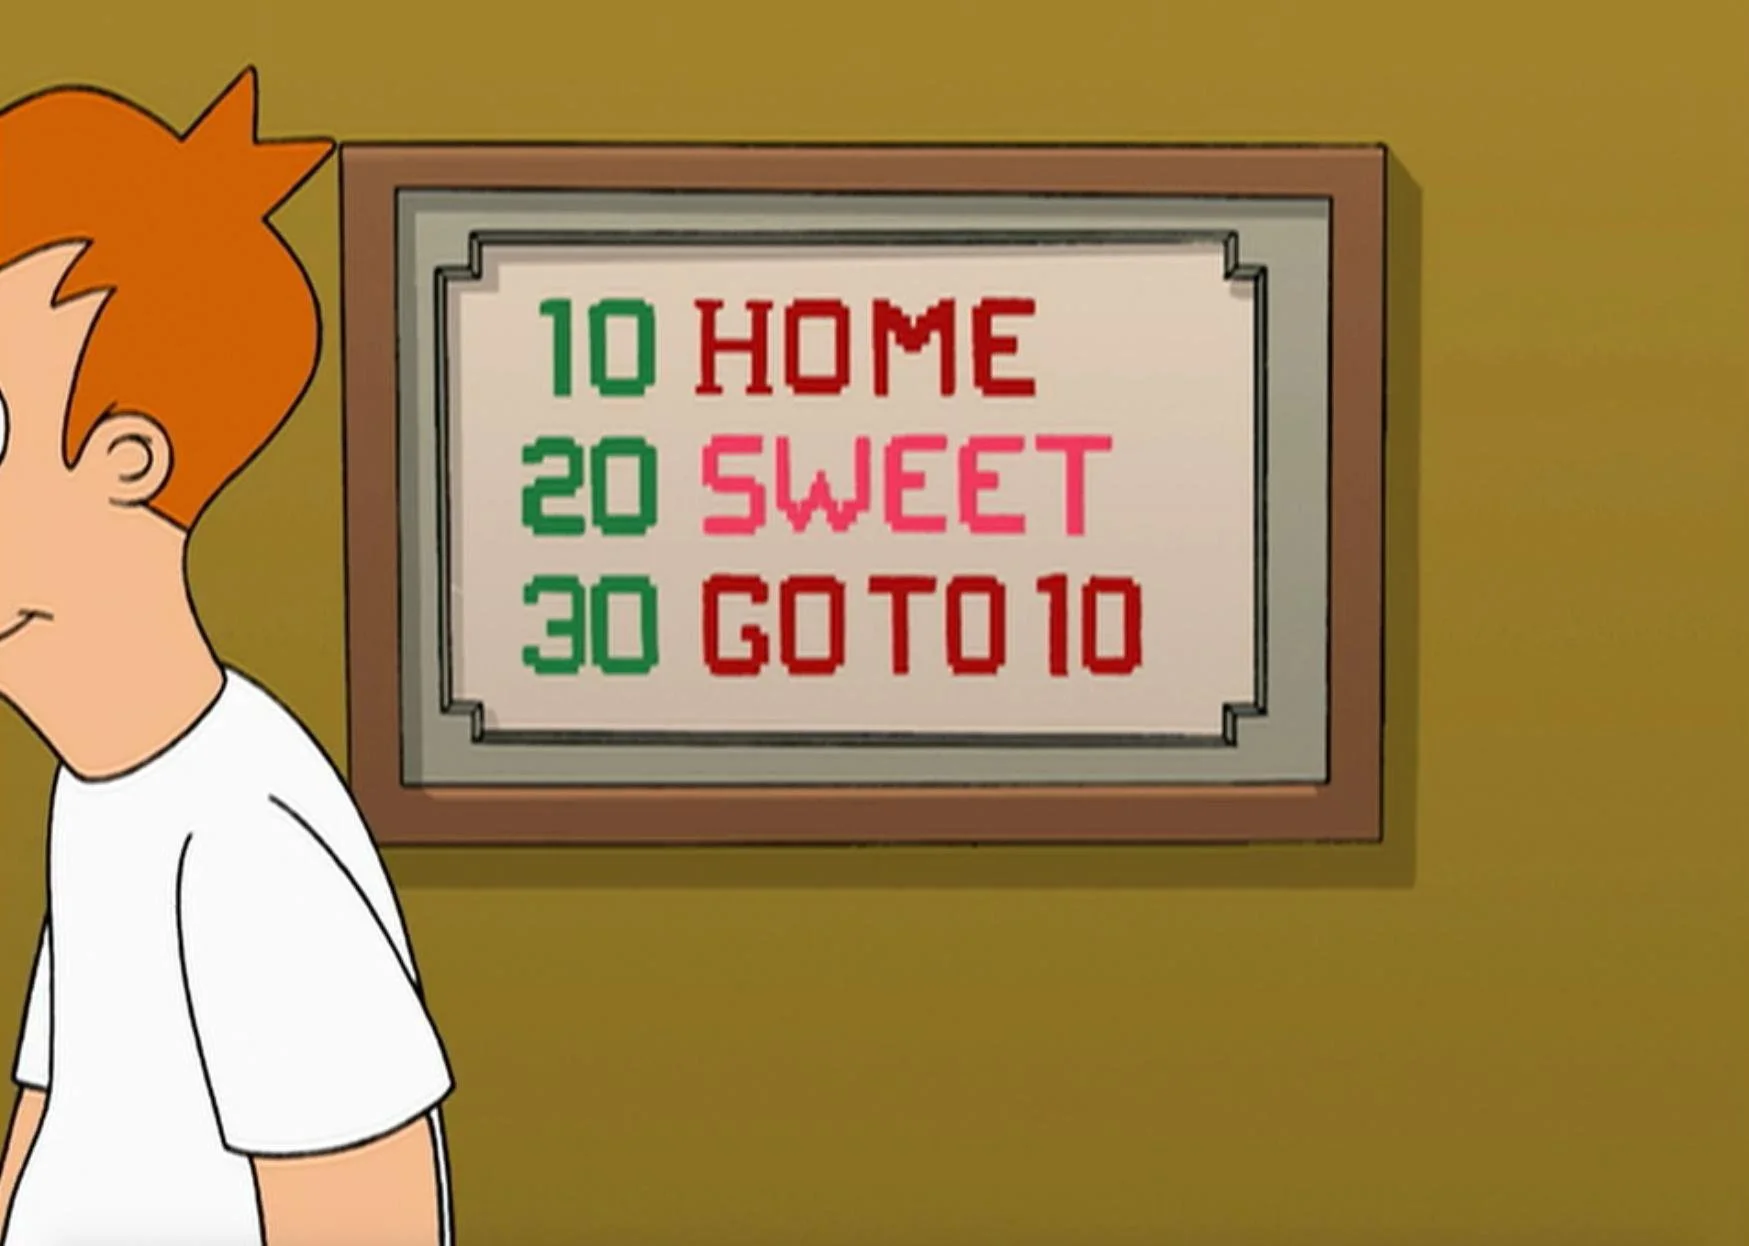 A cartoon image of a cross-stitch from Futurama. It reads 10 HOME, 20 SWEET, 30 GO TO 10